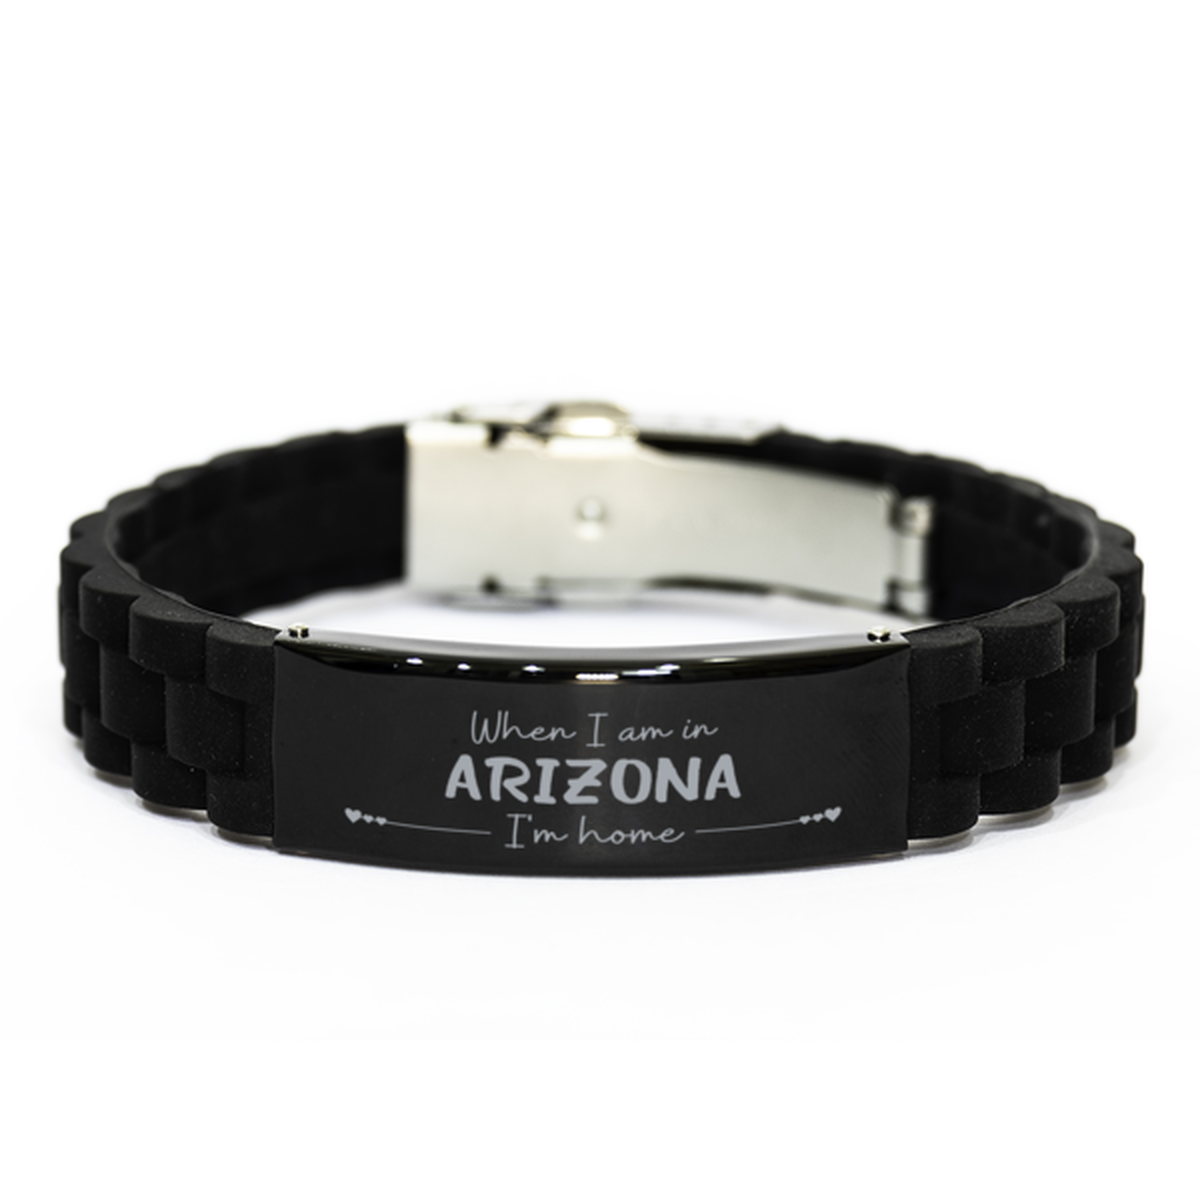 When I am in Arizona I'm home Black Glidelock Clasp Bracelet, Cheap Gifts For Arizona, State Arizona Birthday Gifts for Friends Coworker